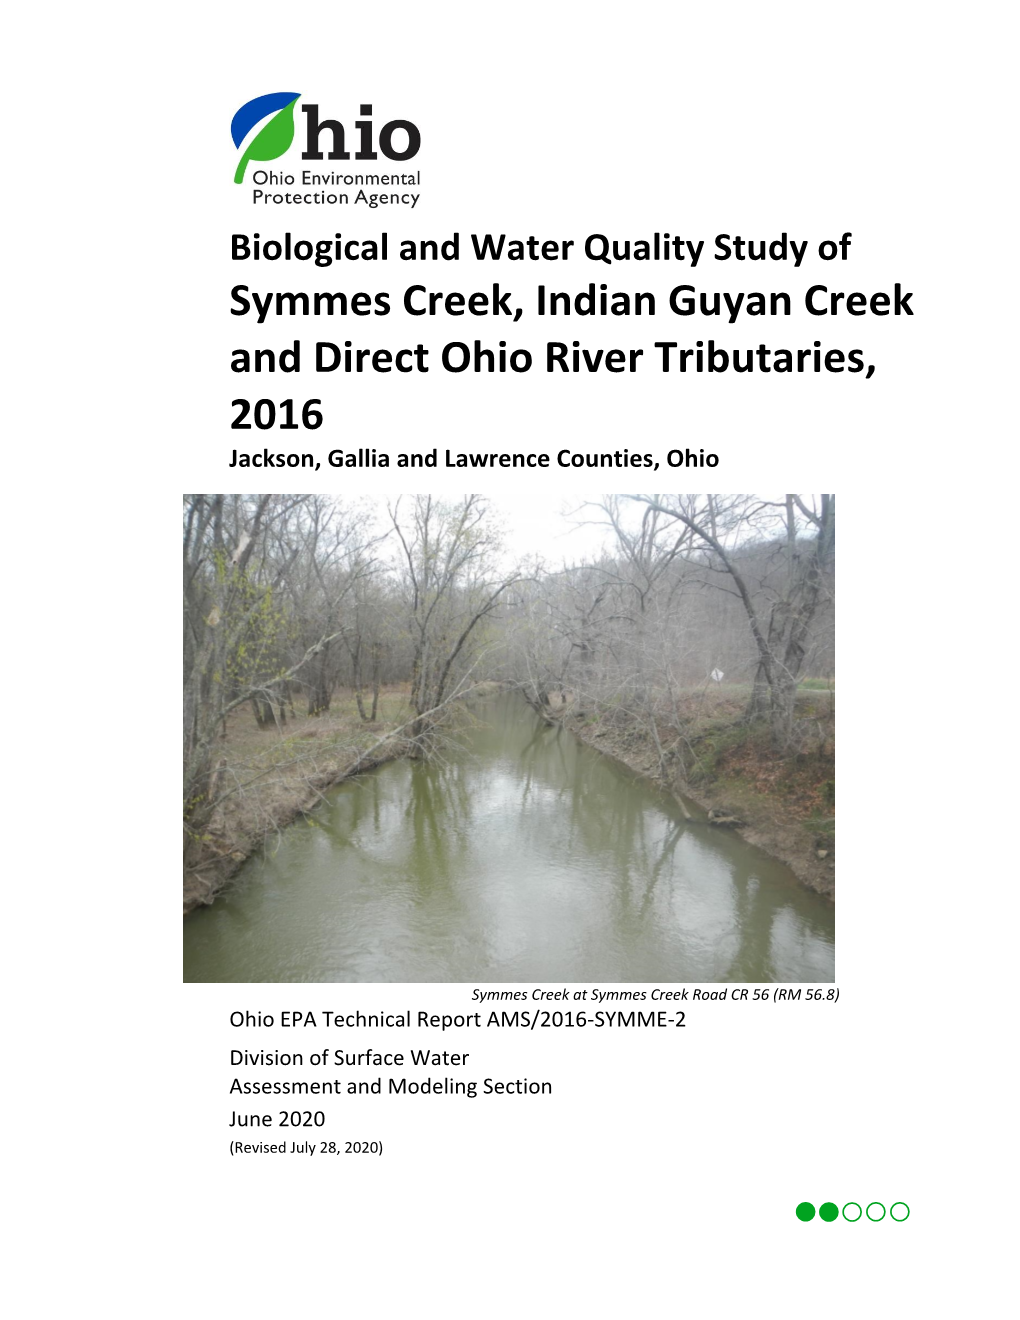 Symmes Creek, Indian Guyan Creek and Direct Ohio River Tributaries, 2016 Jackson, Gallia and Lawrence Counties, Ohio